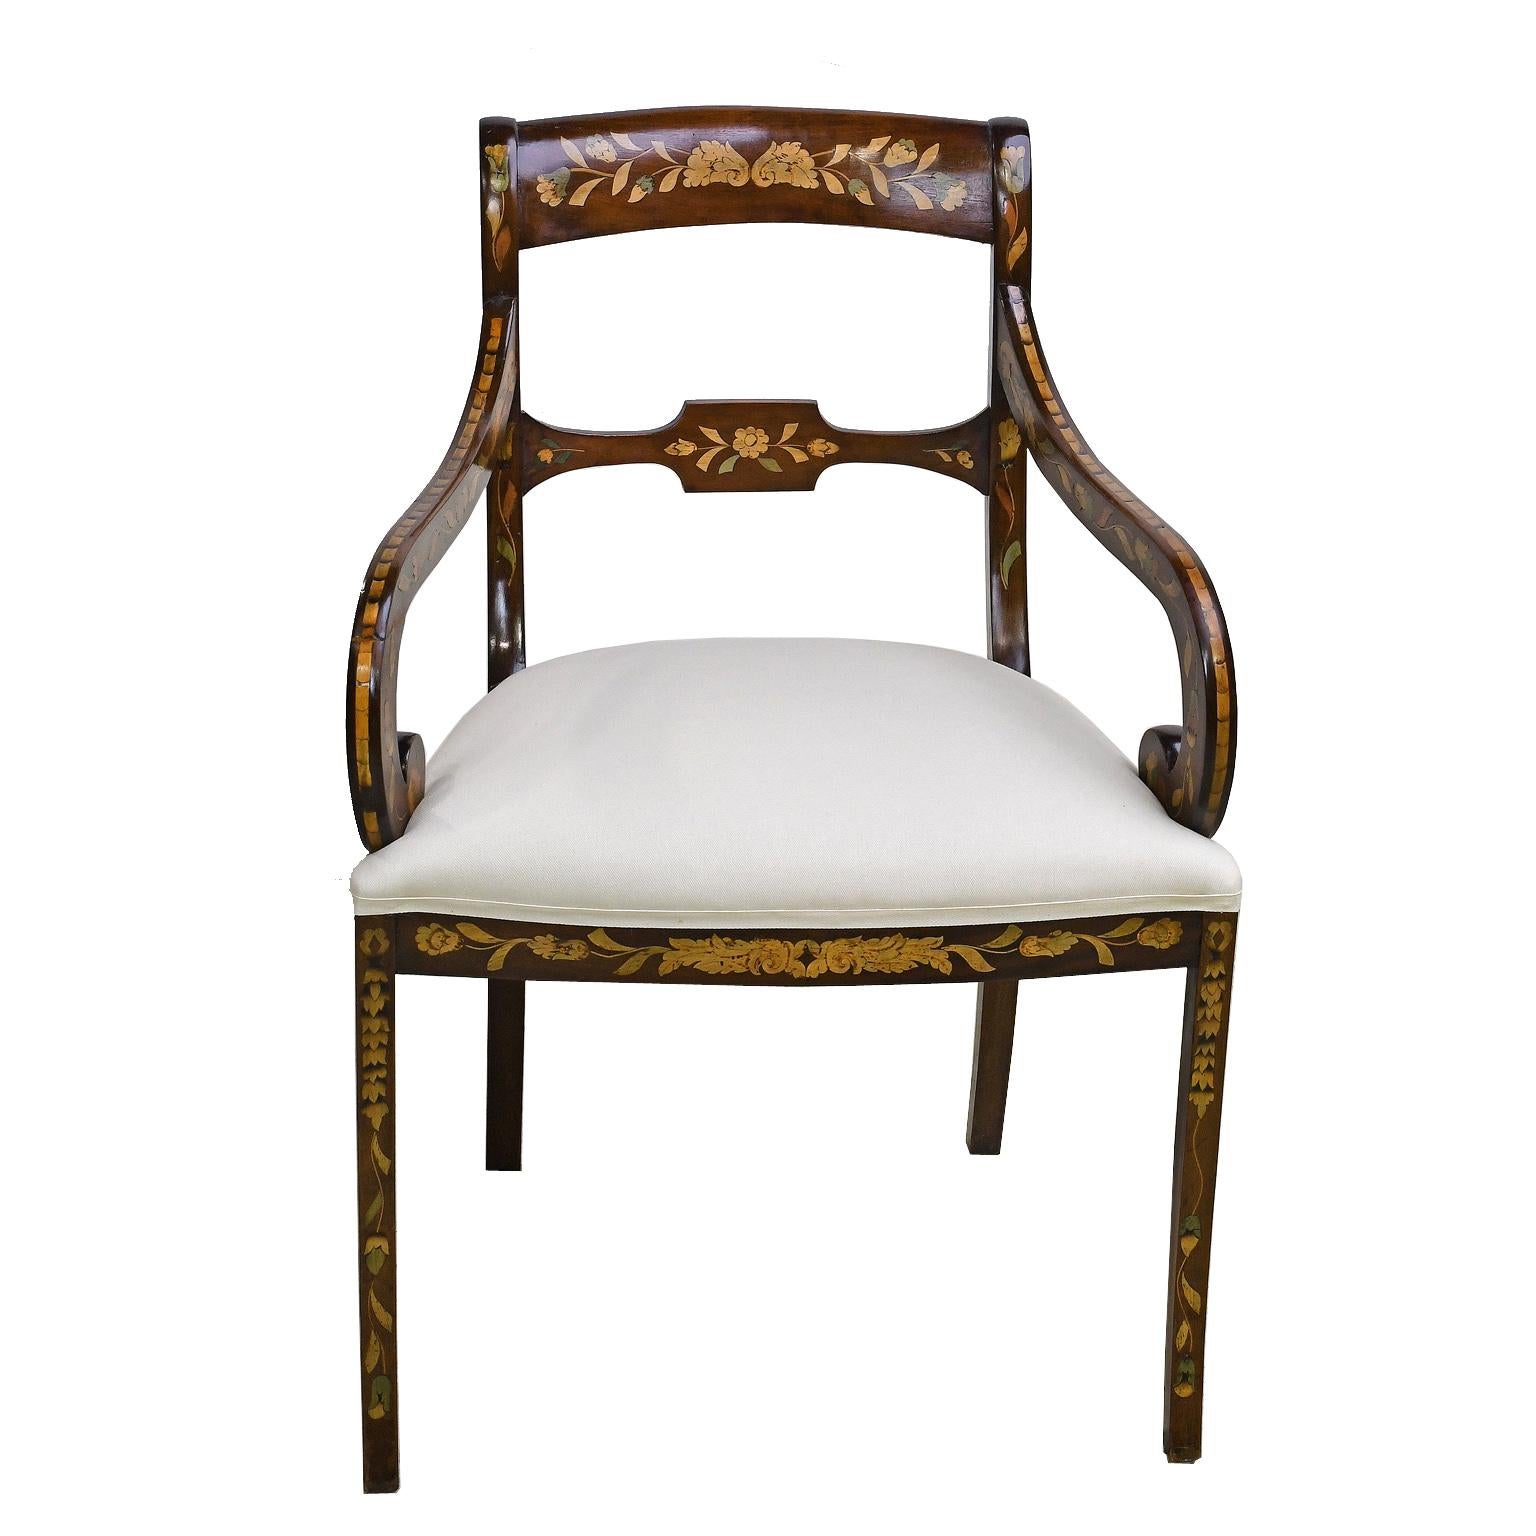 A very beautiful English Regency chair in mahogany with floral & foliate inlays in satinwood & kingwood, with scrolled arms and saber legs. England, possibly British colonial, circa 1820. Restored in our atelier with a French-polish finish and